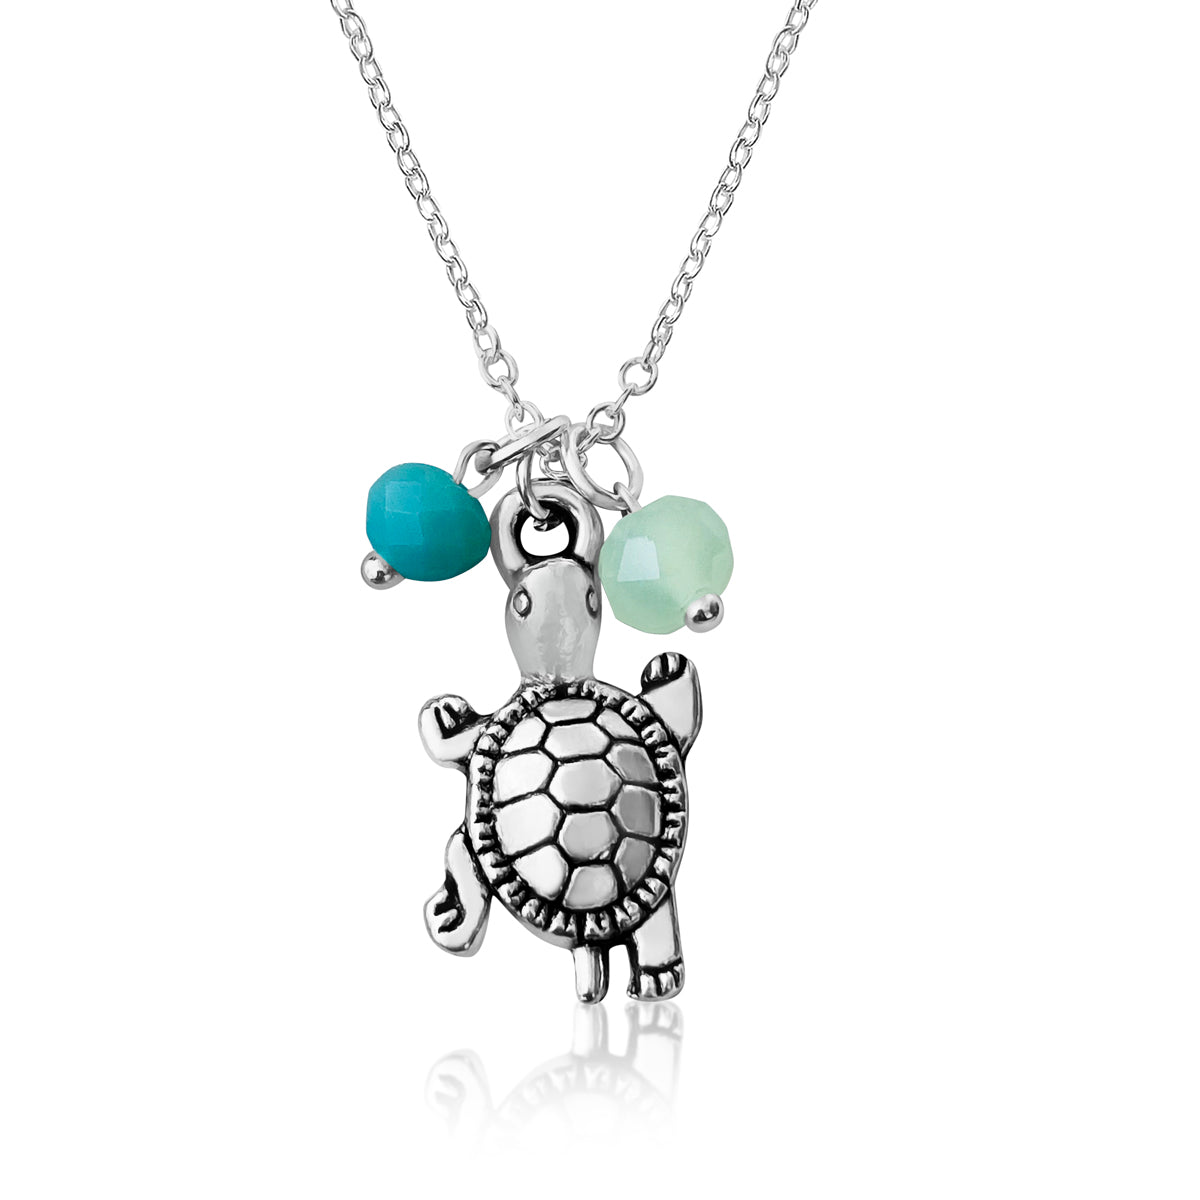 Turtle Necklace with Ocean Foam Green Crystals